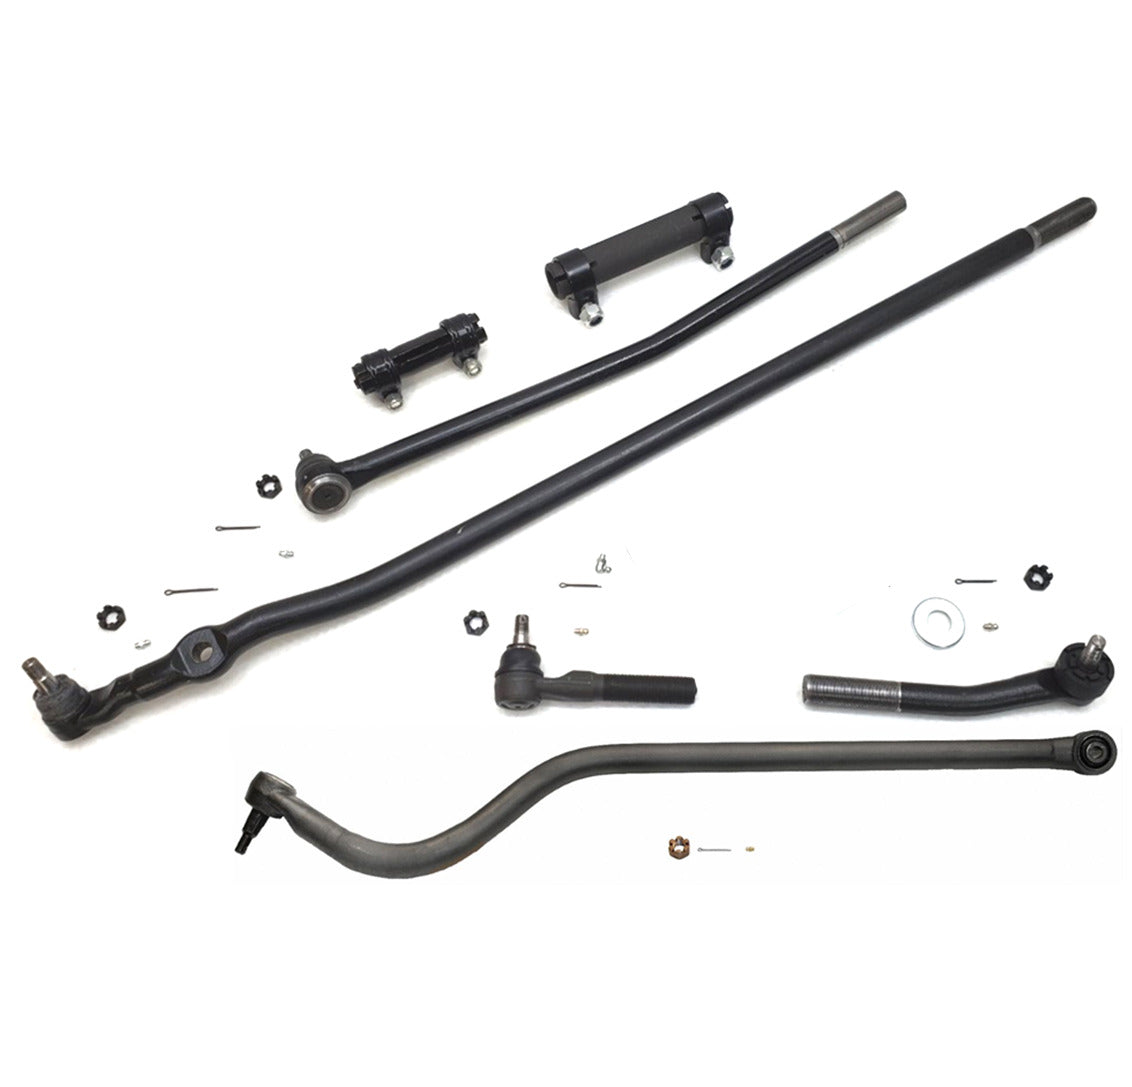 HD Ball Joint Tie Rod Sleeve Kit for 1998-1999 Dodge Ram 2500, 3500 4x4